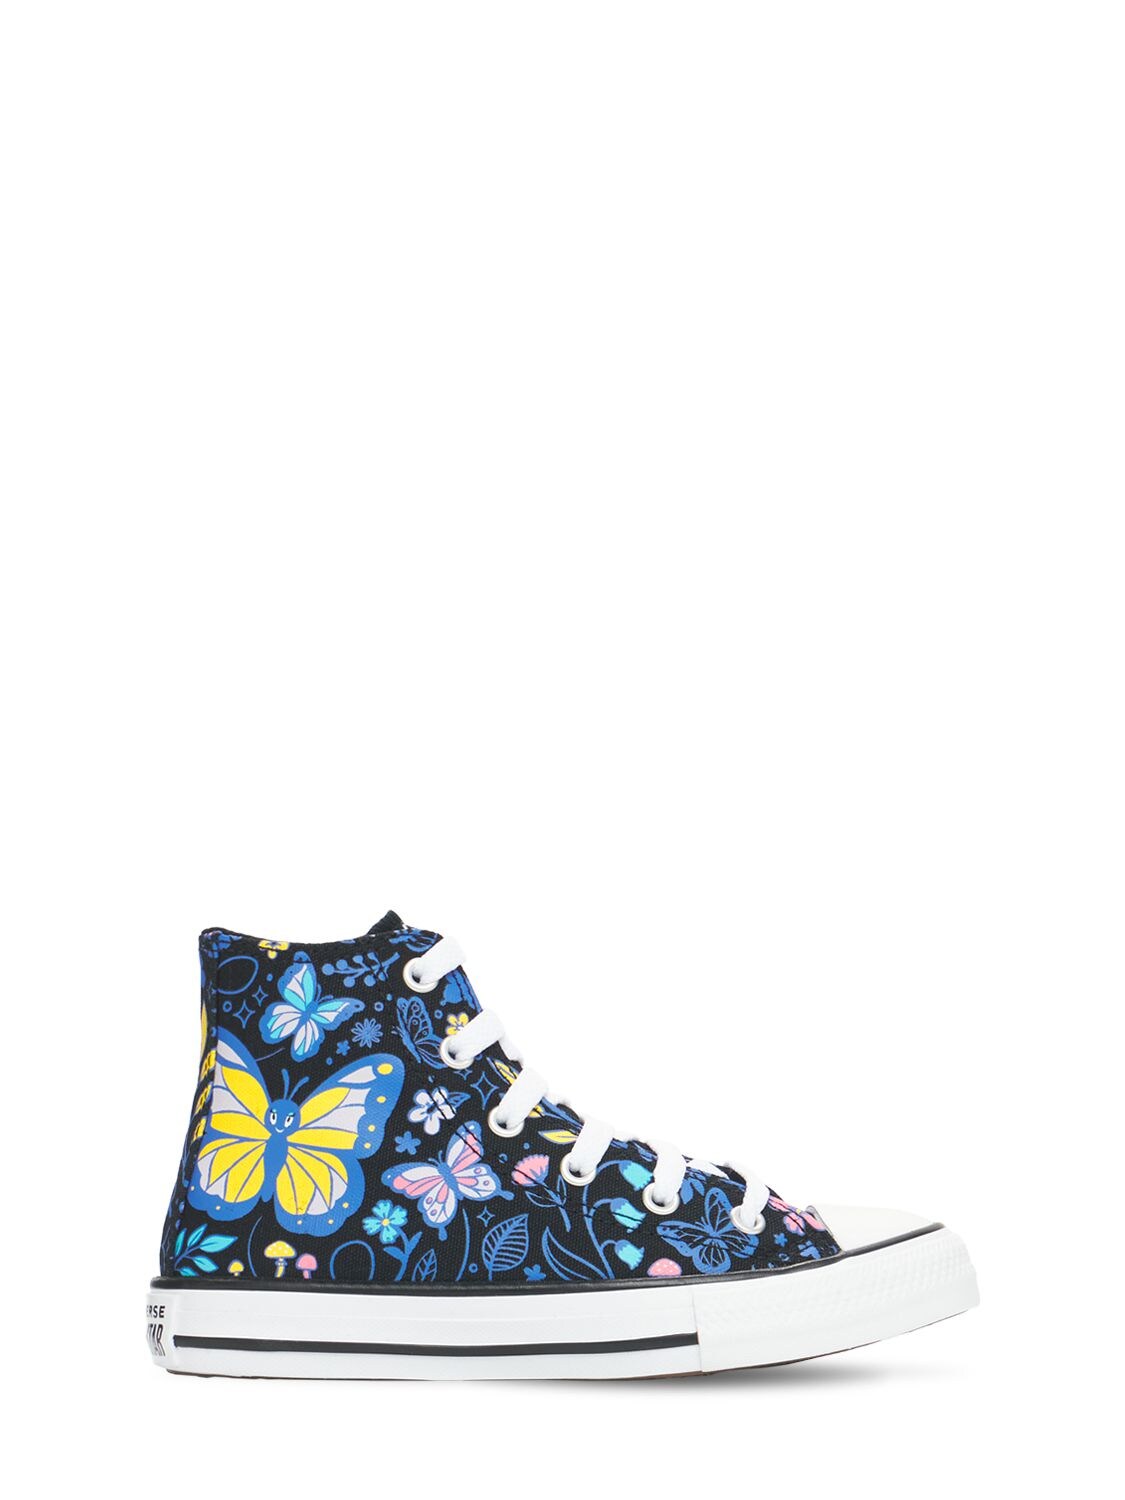 Converse Kids' Printed Chuck Taylor All Star Sneakers In Black